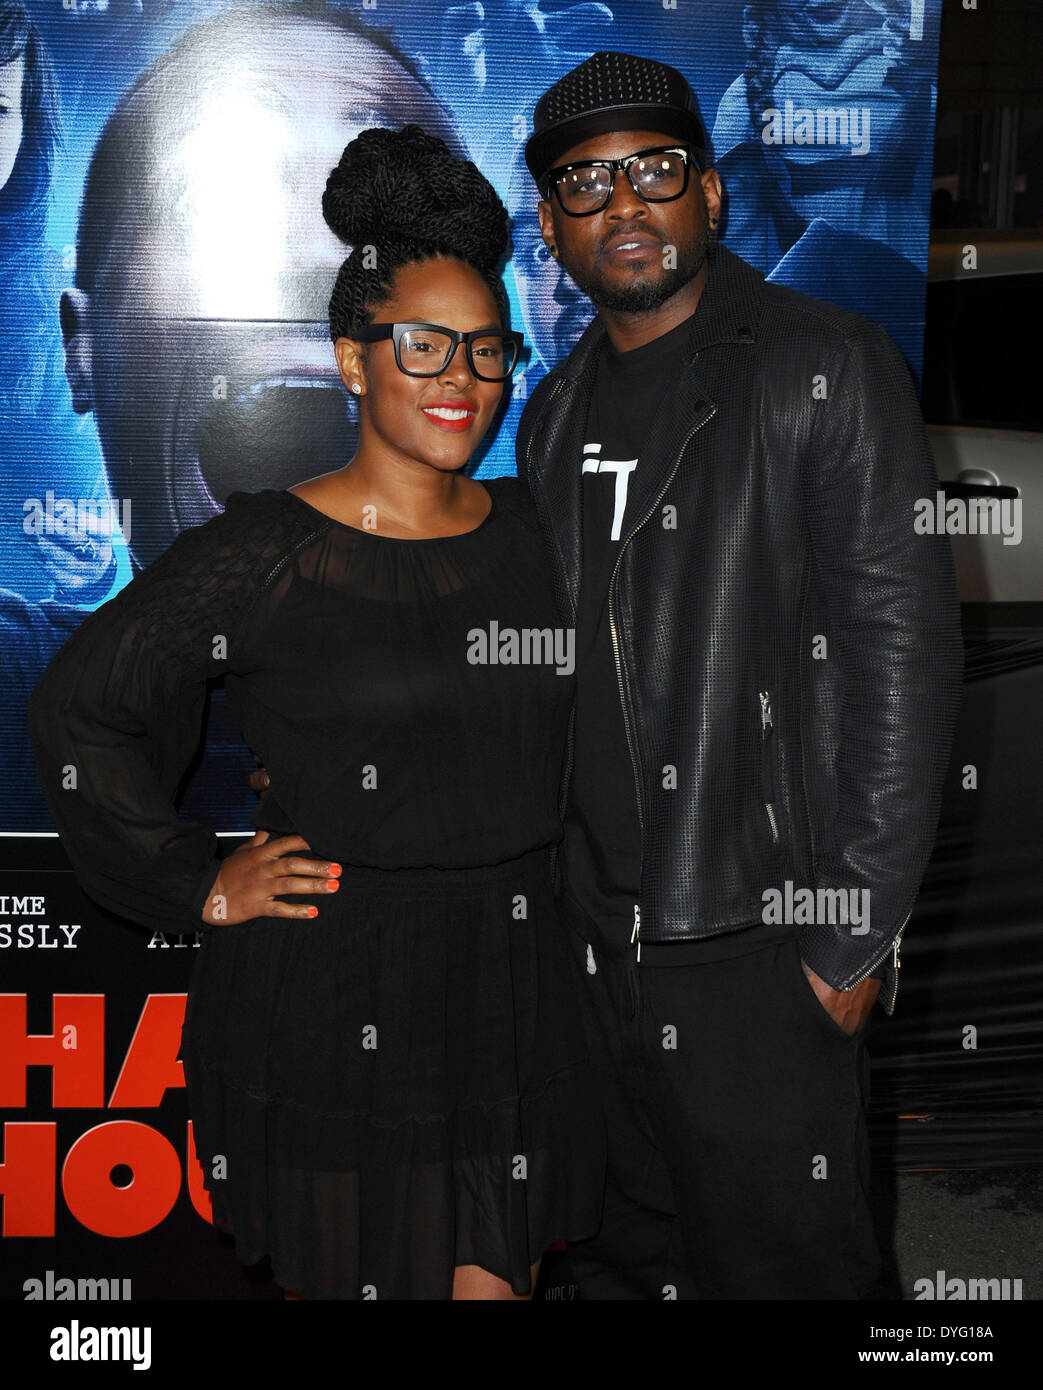 Los Angeles, California, USA. 16th Apr, 2014. Omar Epps, Keisha Epps attending the Los Angeles Premiere of ''A Haunted House 2'' held at the Regal Cinemas at L.A. Live in Los Angeles, California on April 16, 2014. 2014 Credit:  D. Long/Globe Photos/ZUMAPRESS.com/Alamy Live News Stock Photo